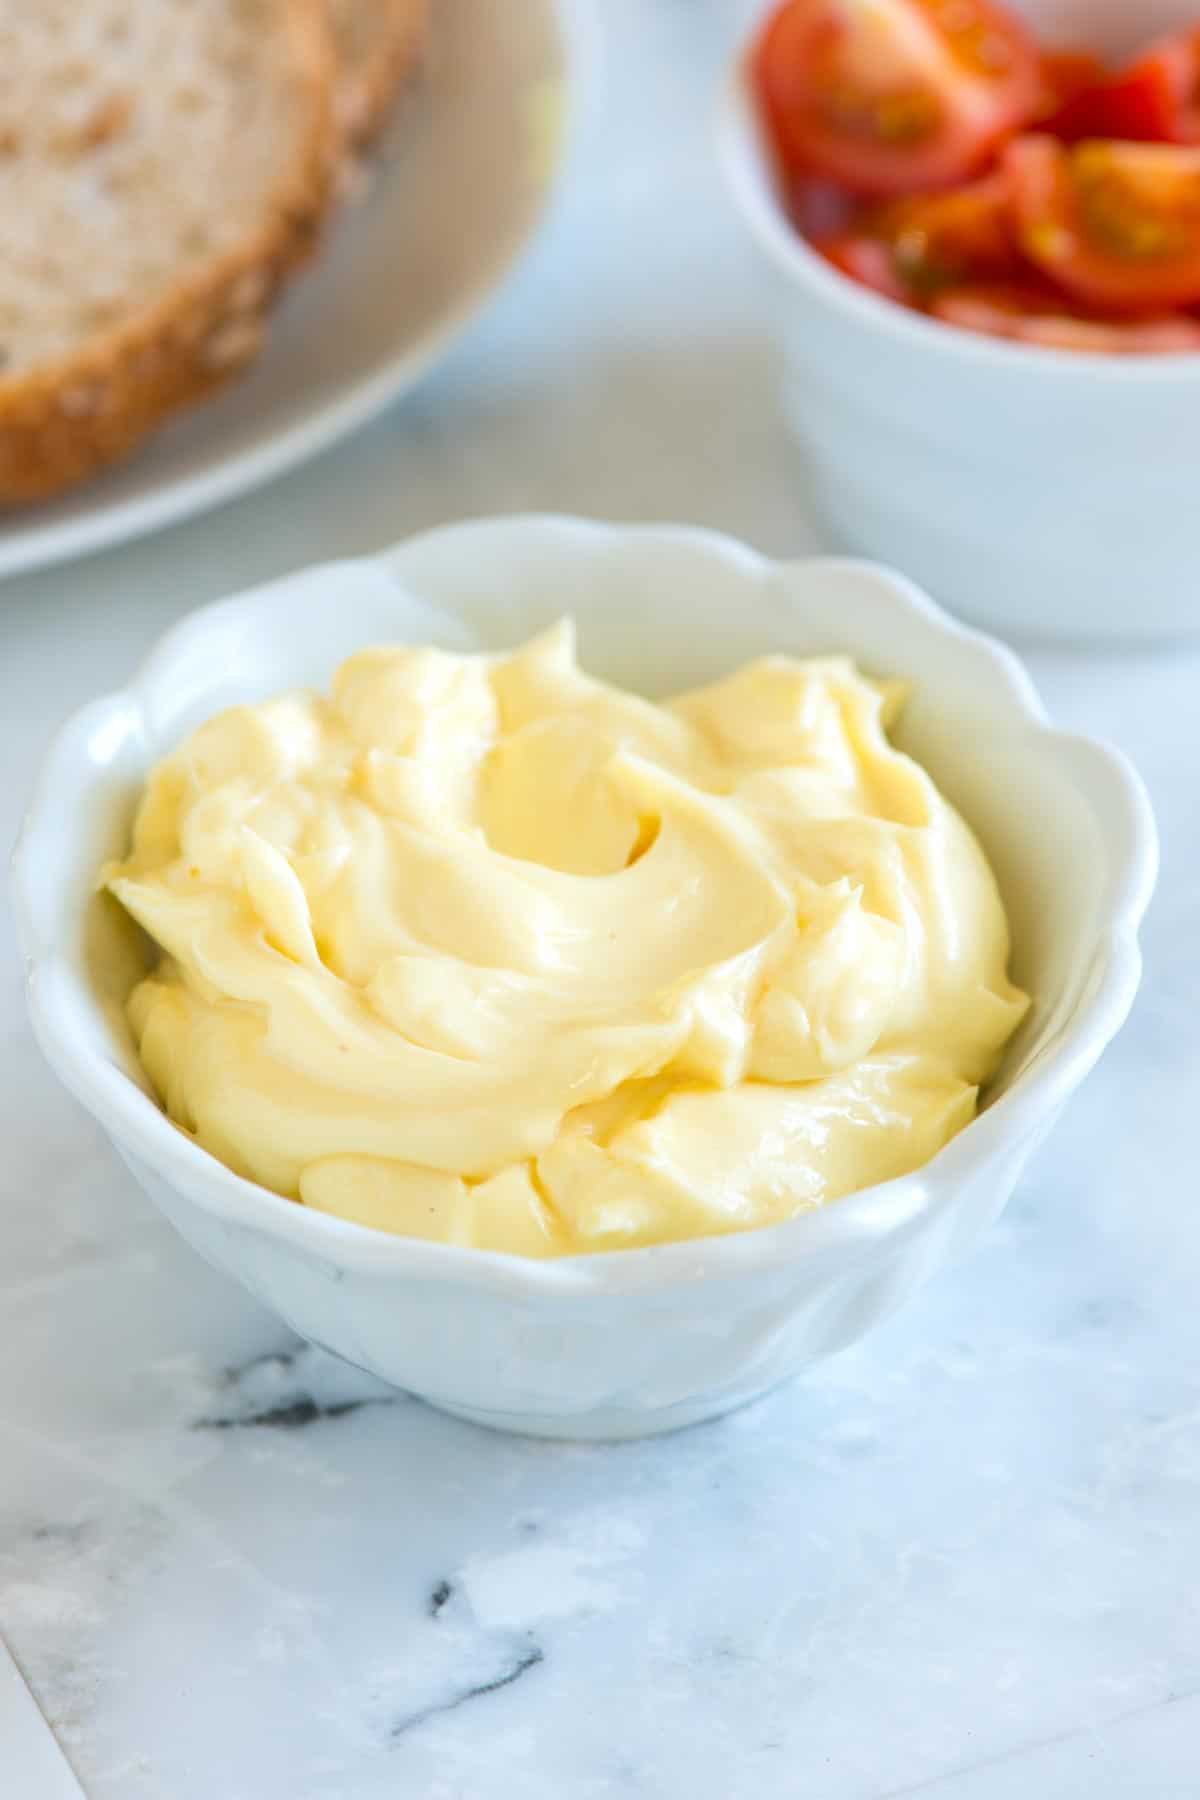 How to make mayonnaise in less than 10 minutes! Using whole eggs instead of just the yolk, makes this homemade mayonnaise recipe practically fail-proof and extra easy.